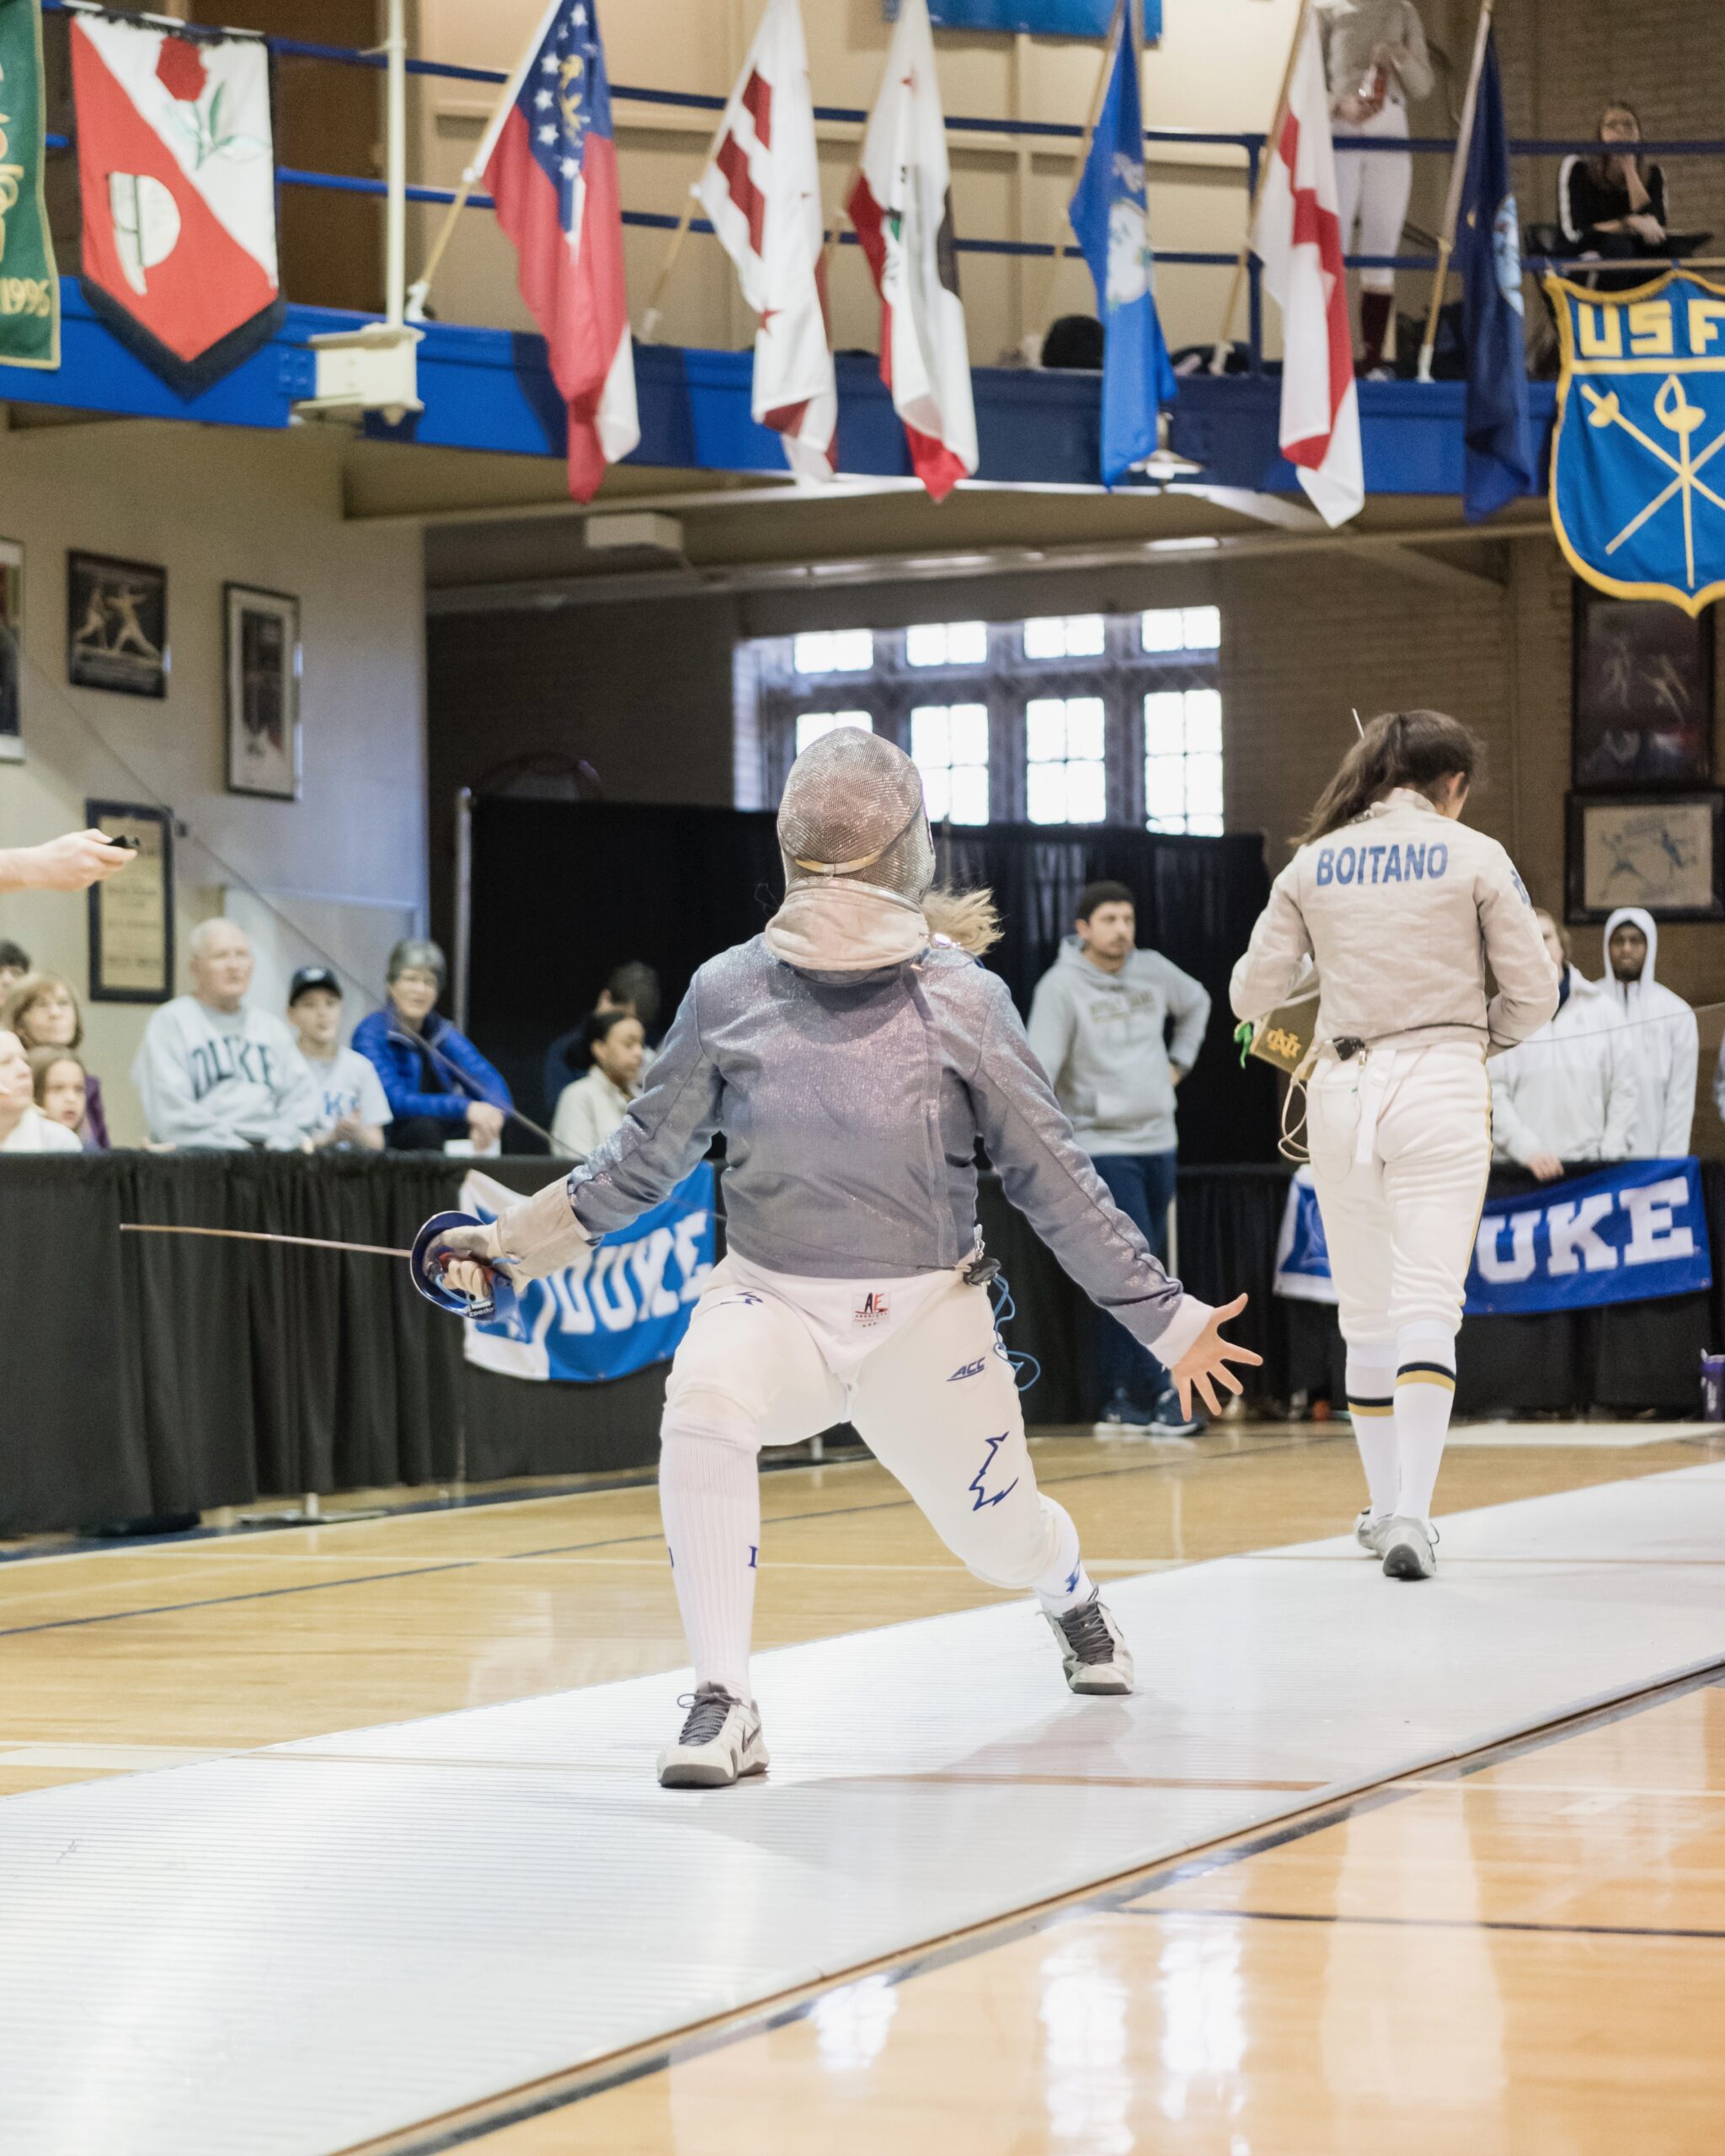 Duke Women's Fencing takes on the Temple University Owls and the University of Notre Dame Leprechauns at Card gym in Durham, North Carolina on February 9, 2020.